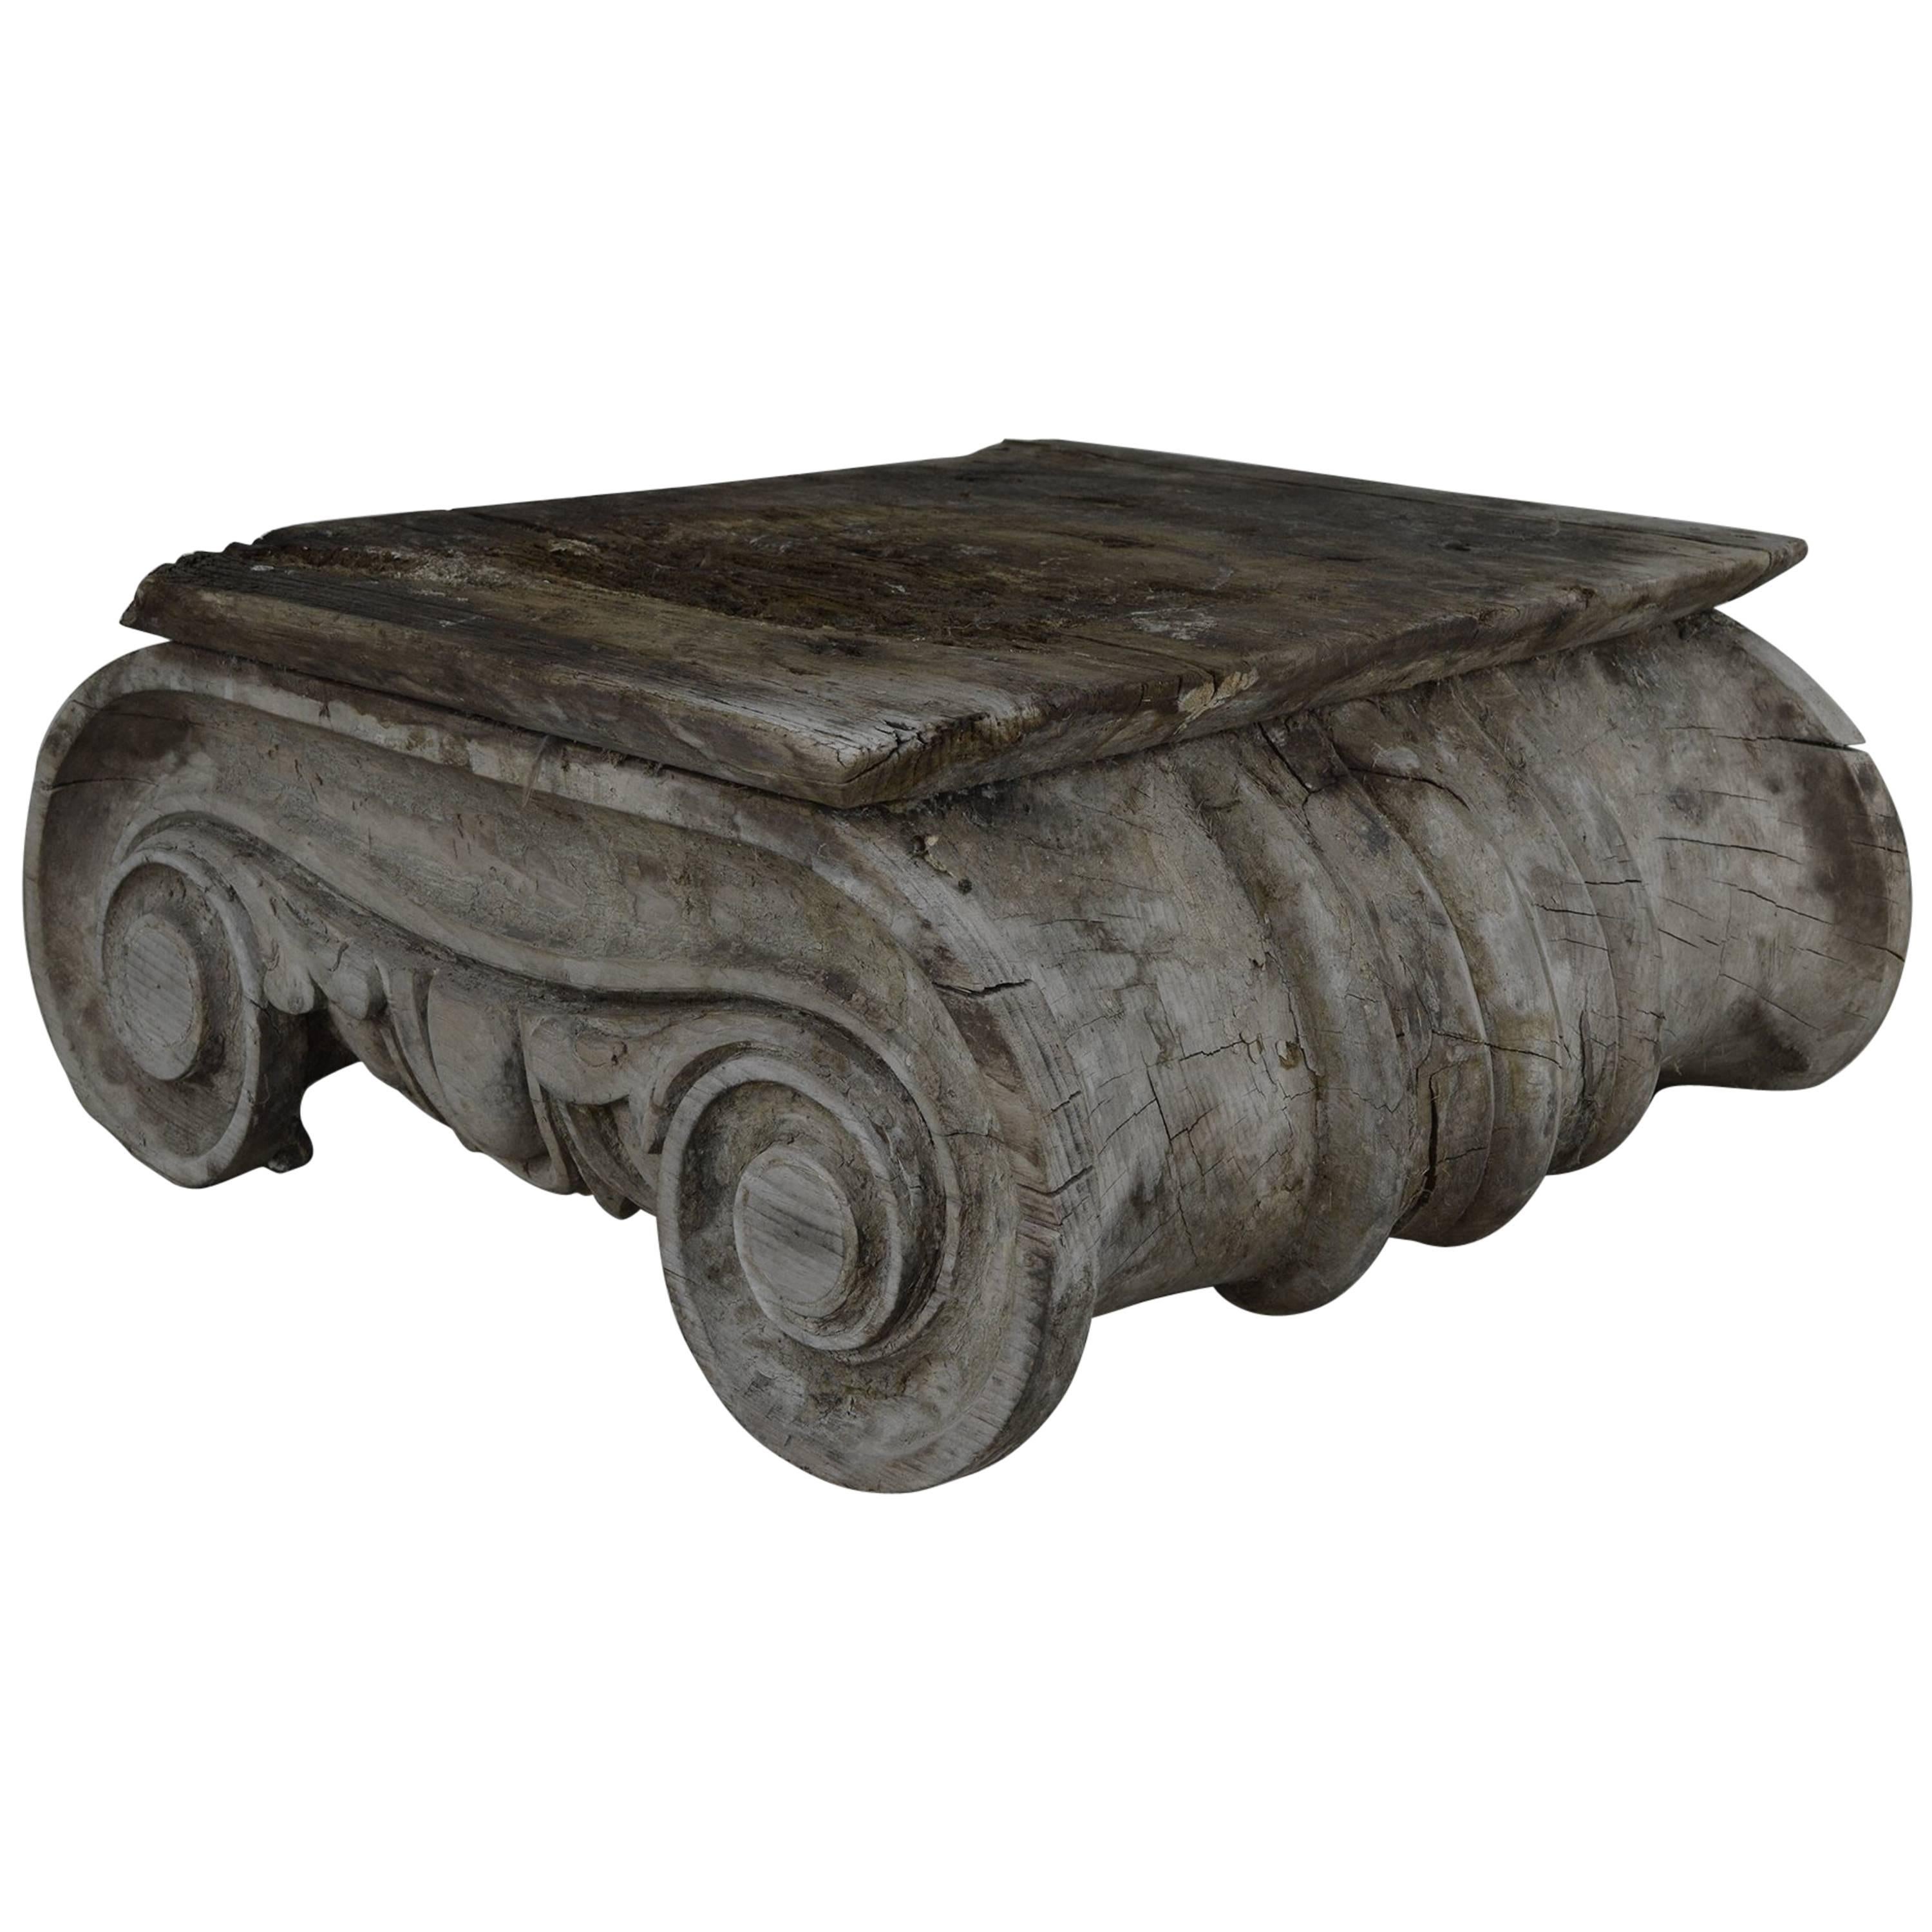 Antique Painted Wood Ionic Column Capital, Greek Revival Style